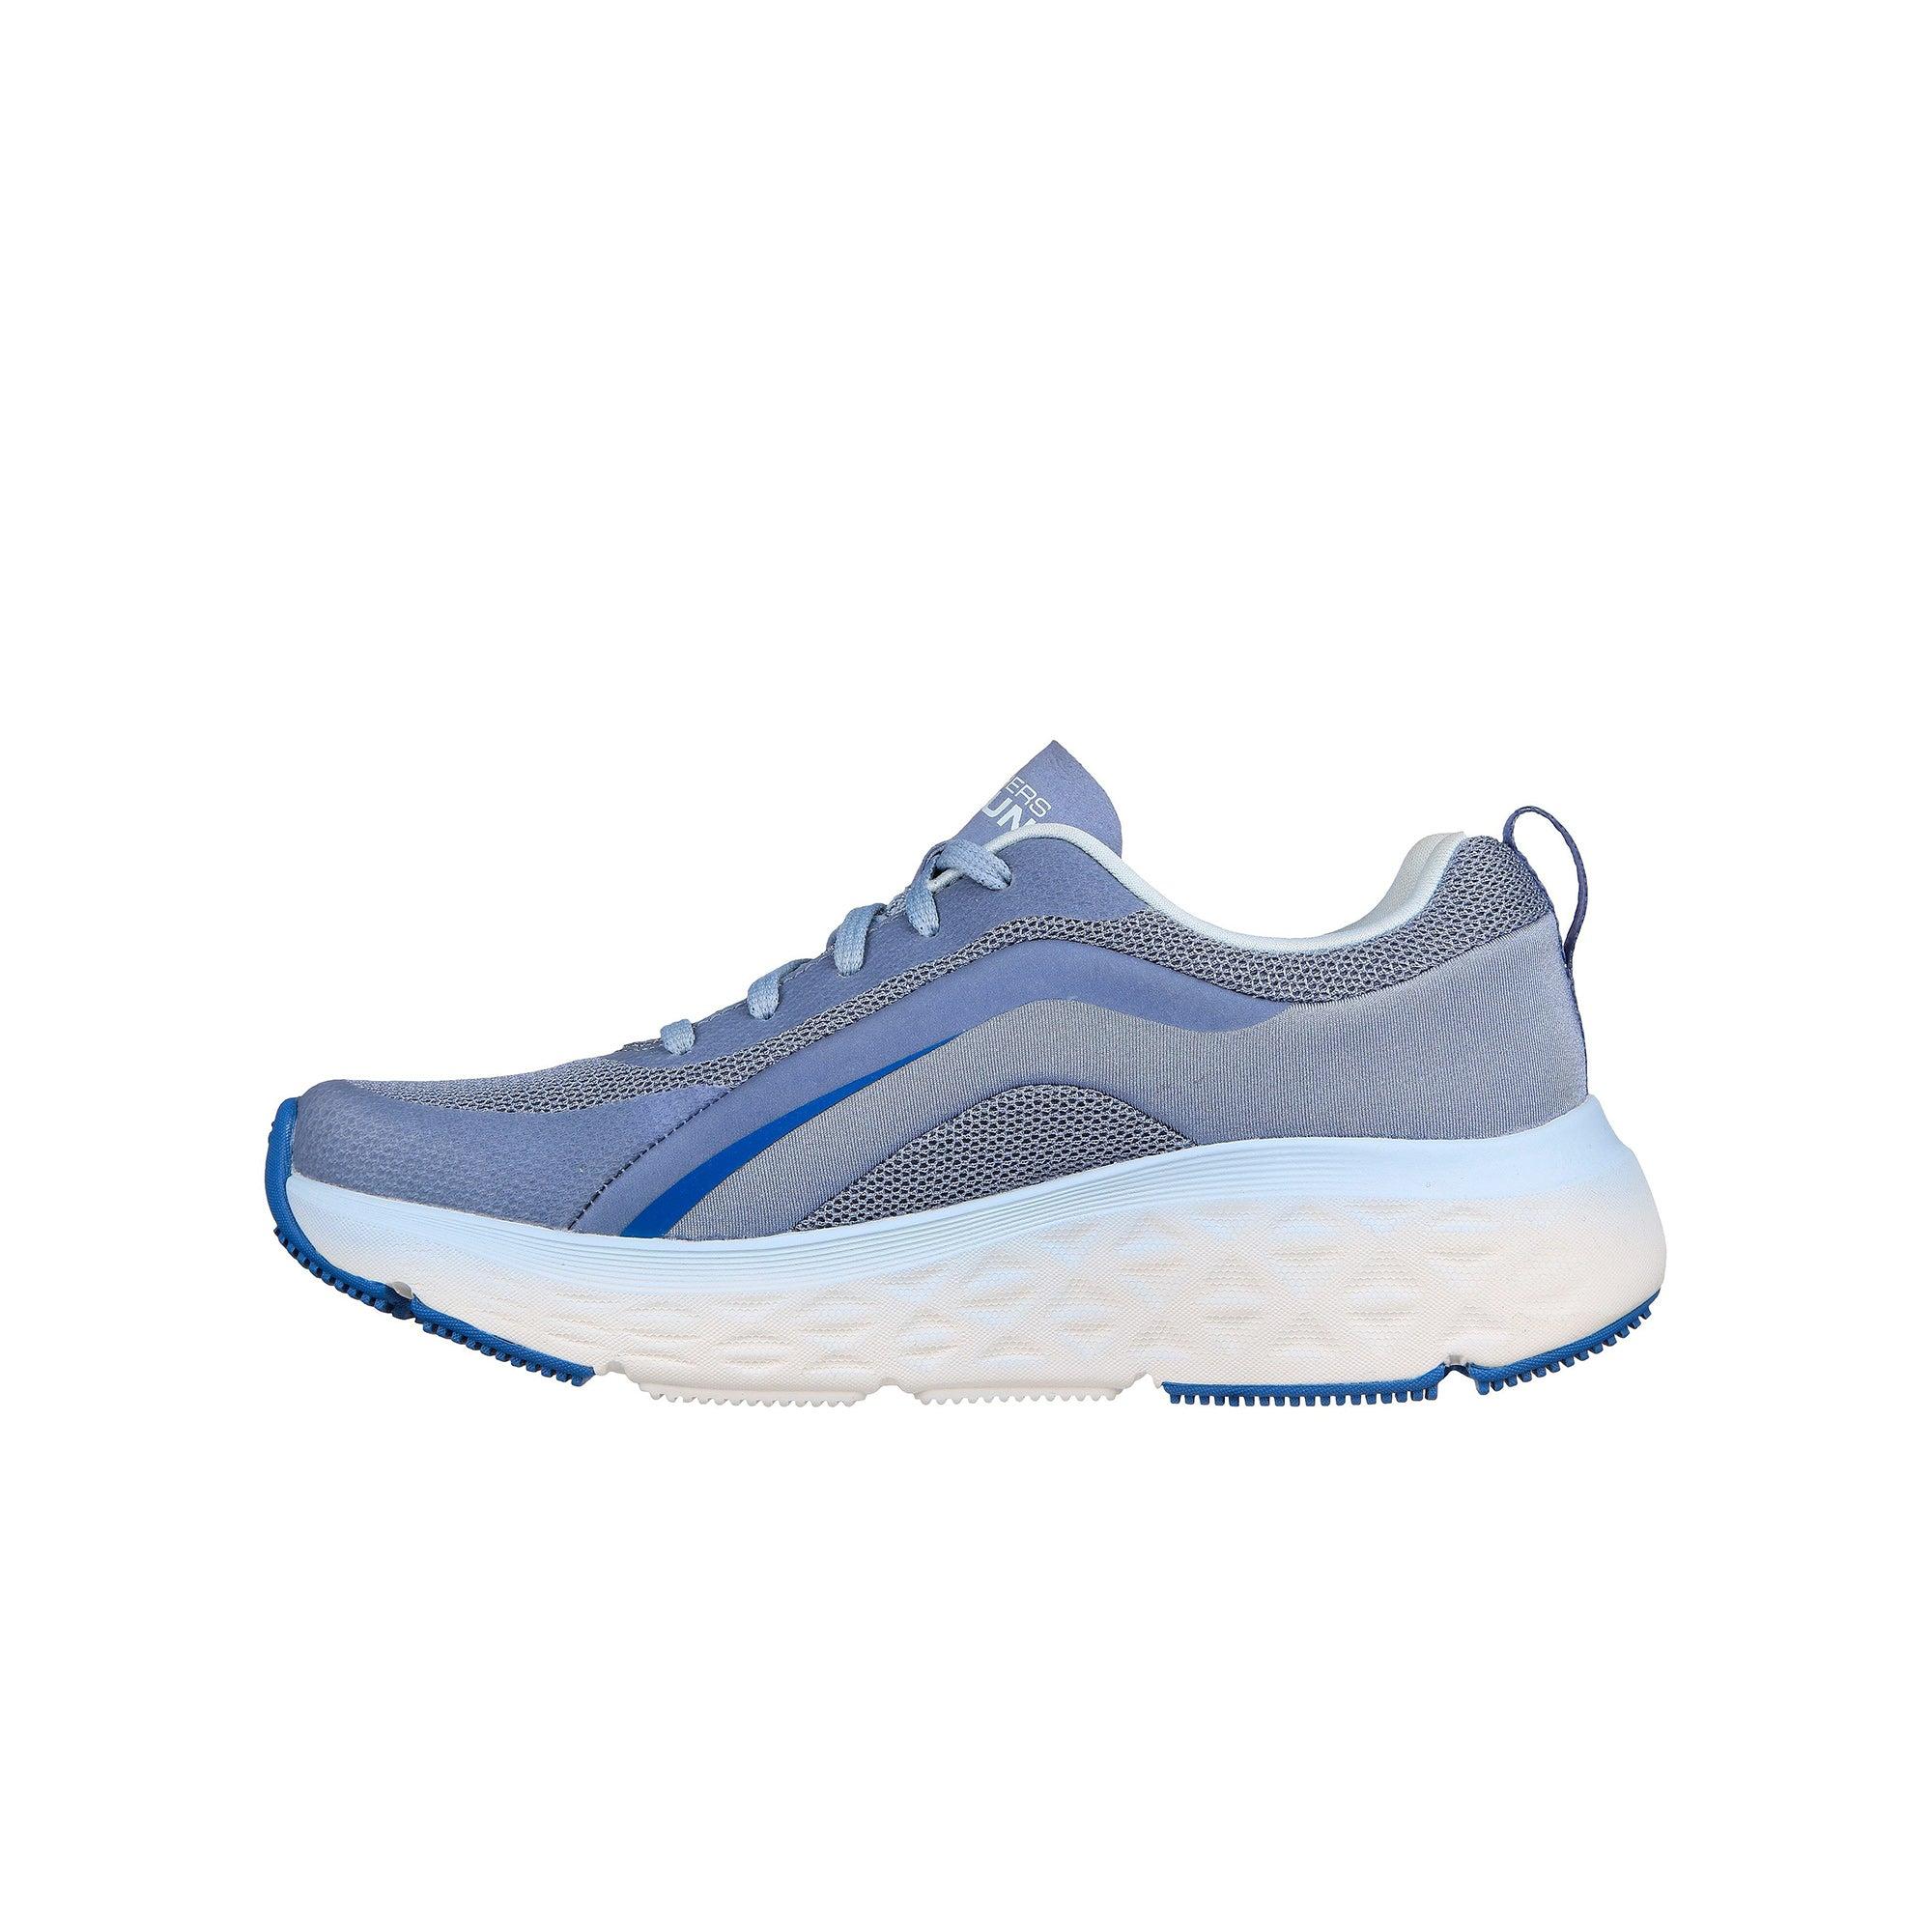 Giày thể thao nữ Skechers Max Cushioning Delta - 129121